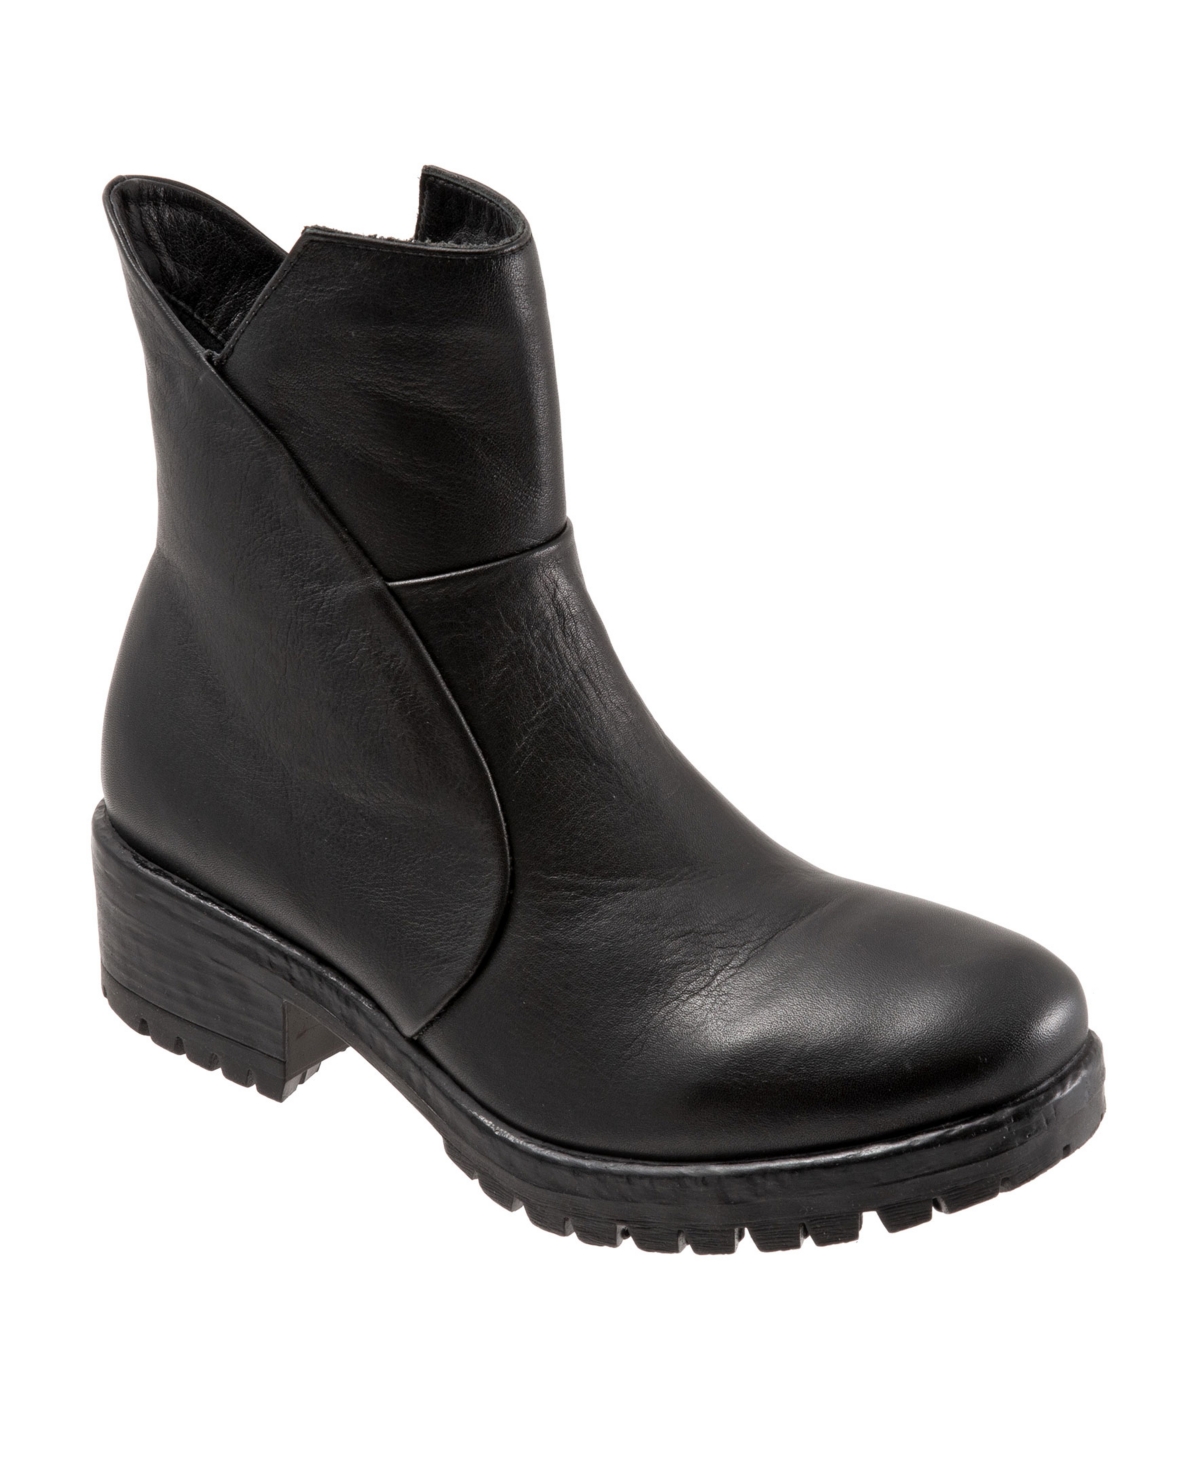 Women's Forge Boots - Black